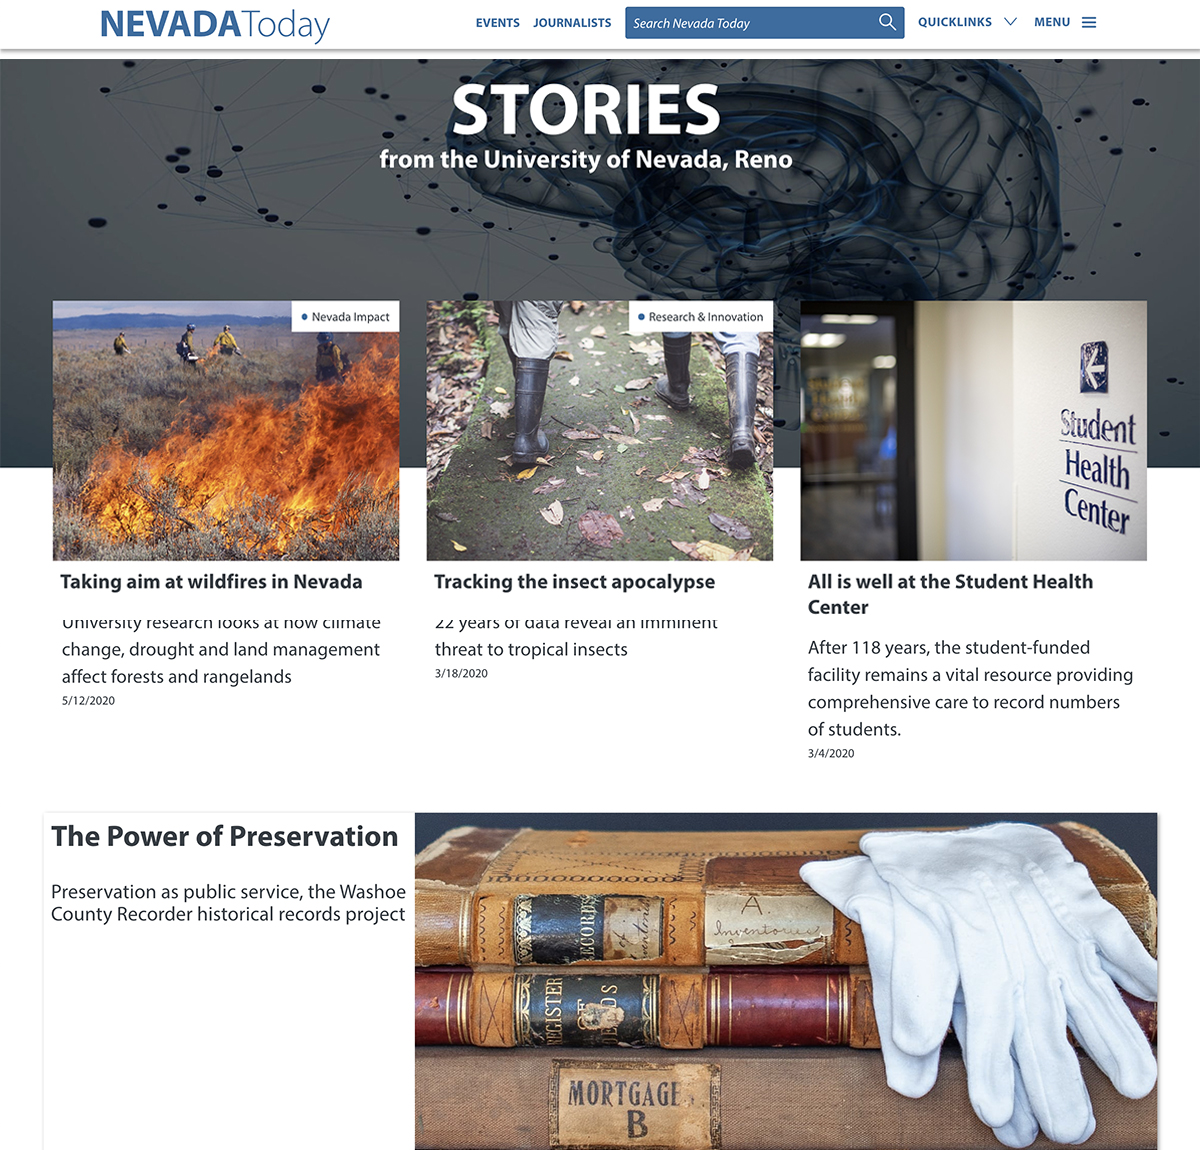 NevadaToday Shocase Stories Home Page